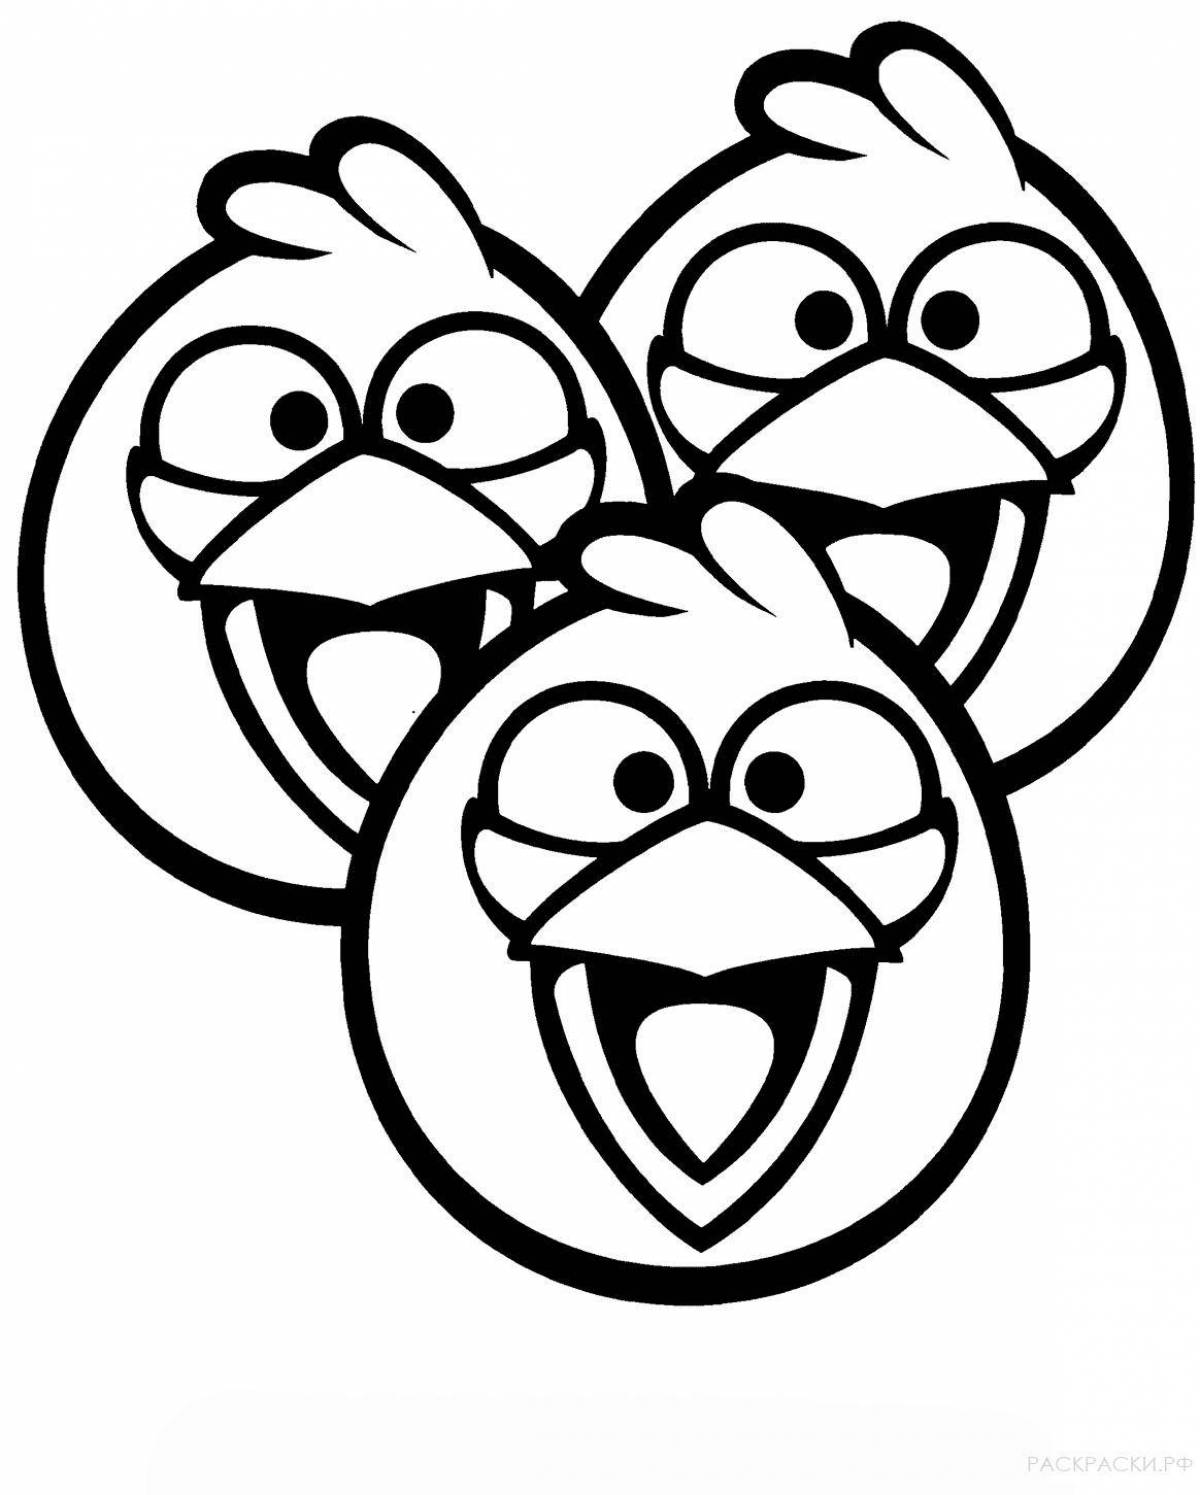 Incredible angry birds coloring book